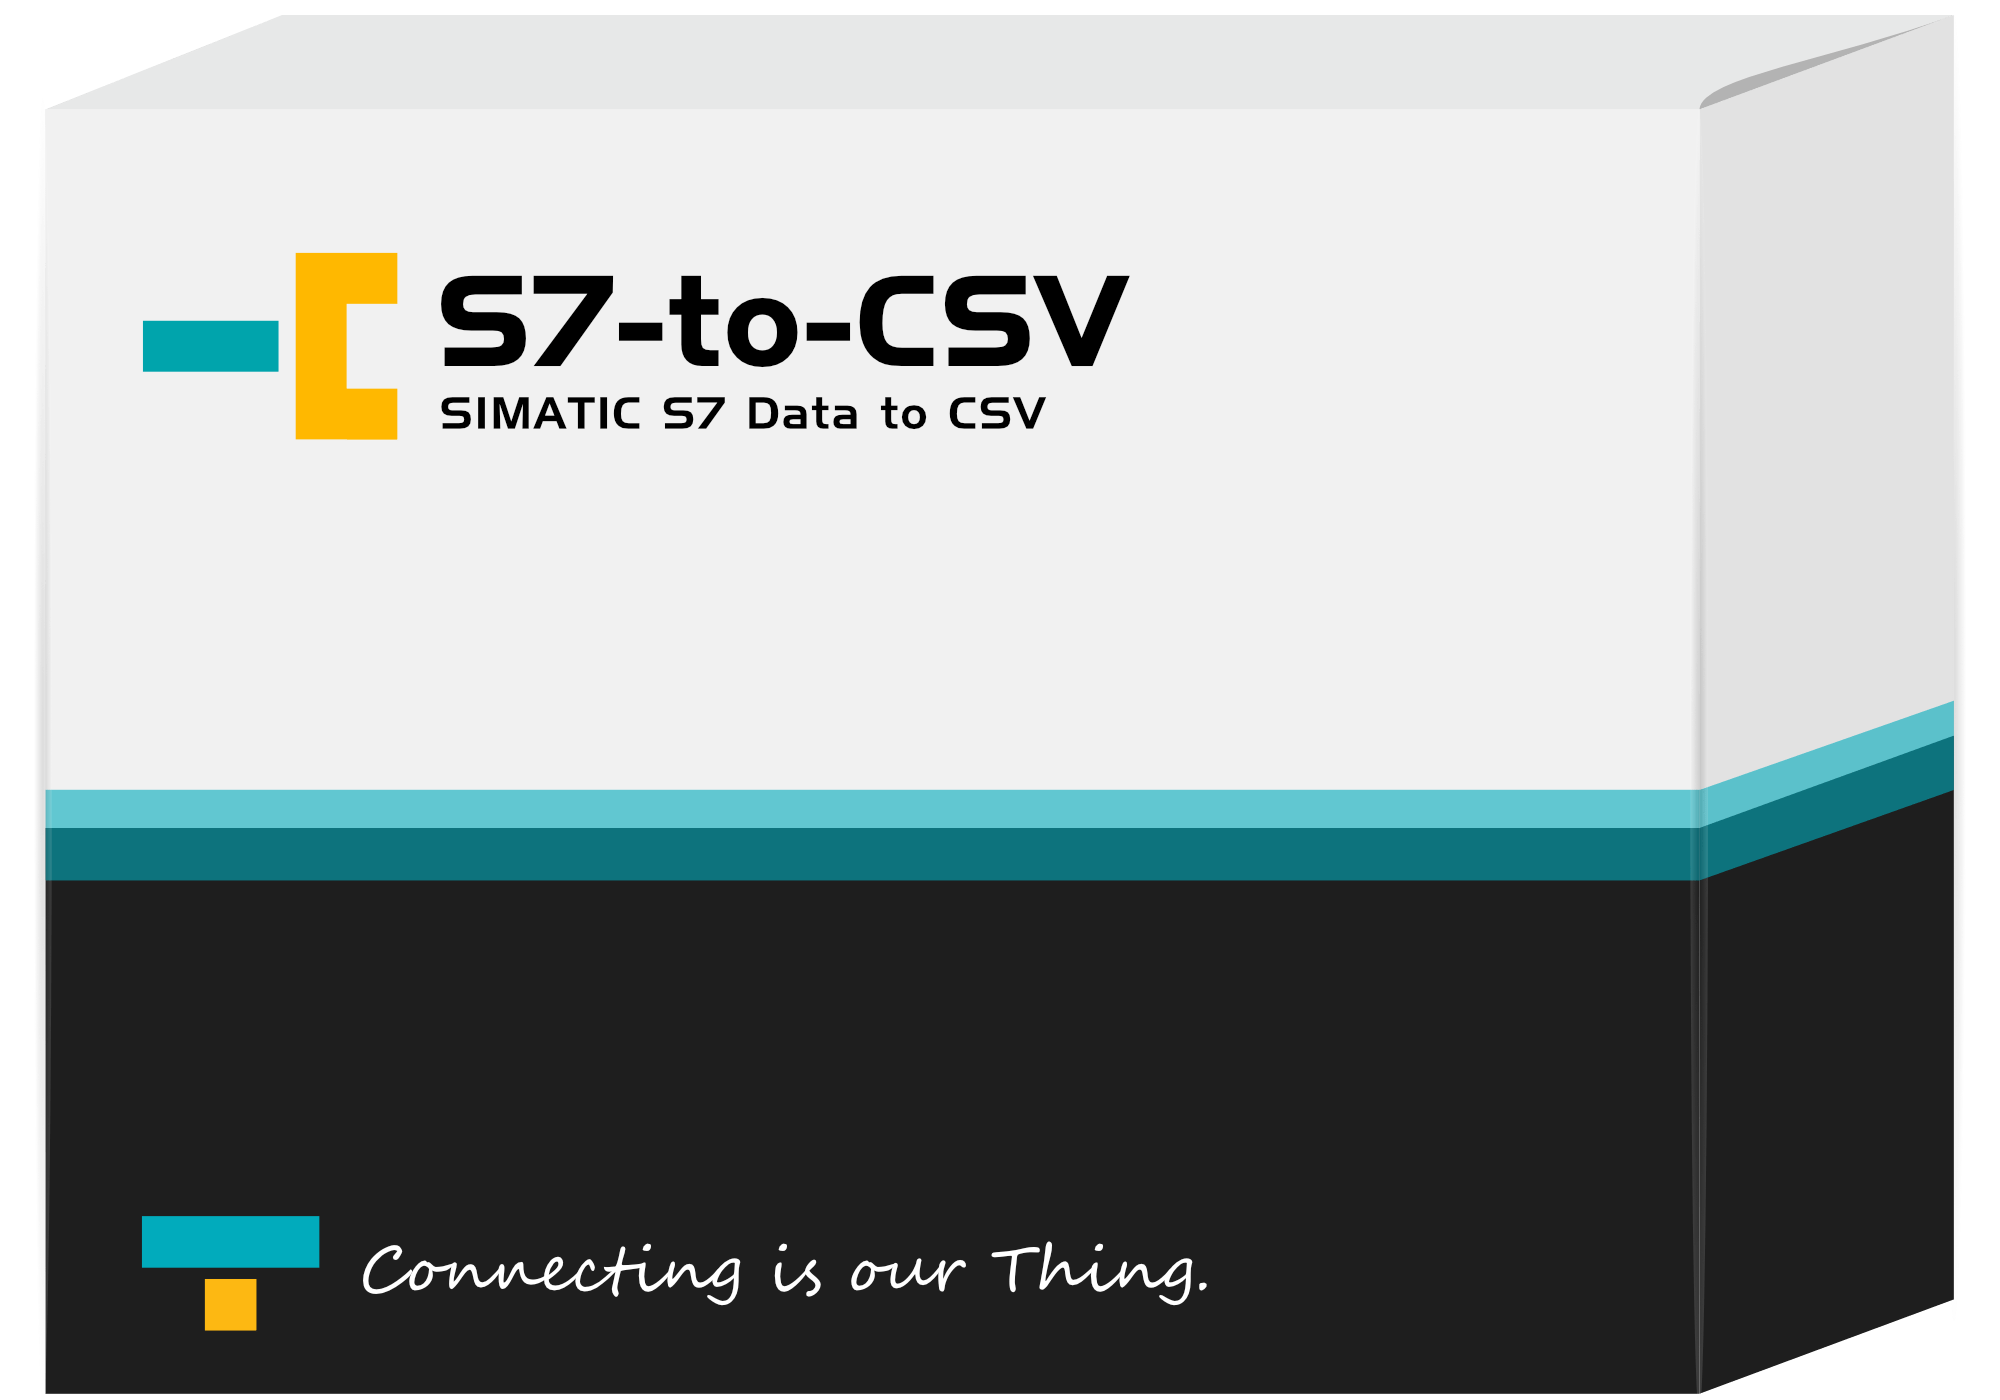 S7-to-CSV product image